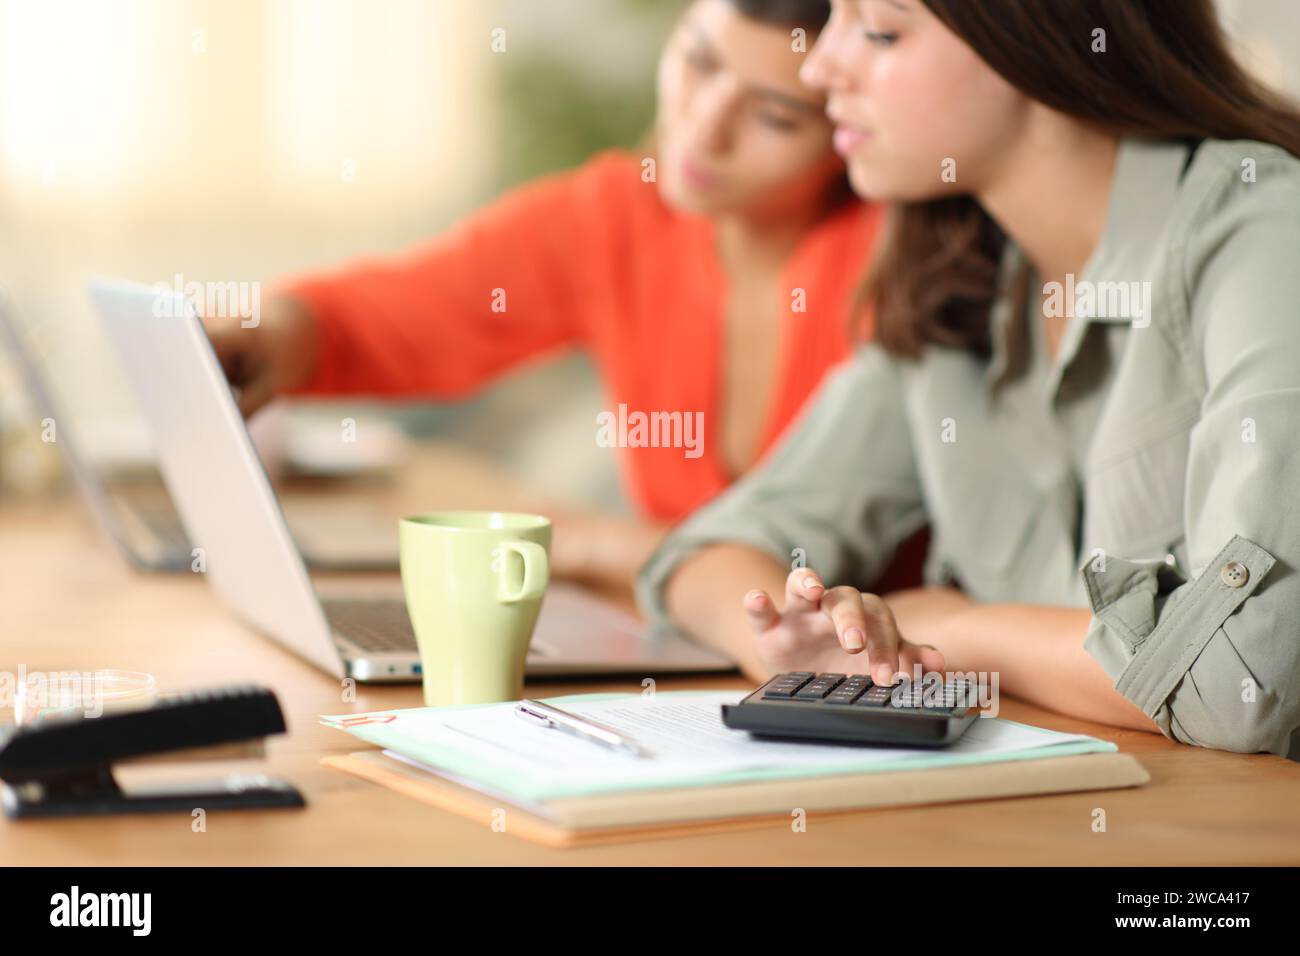 Concentrated tele workers working online at home with laptops Stock Photo